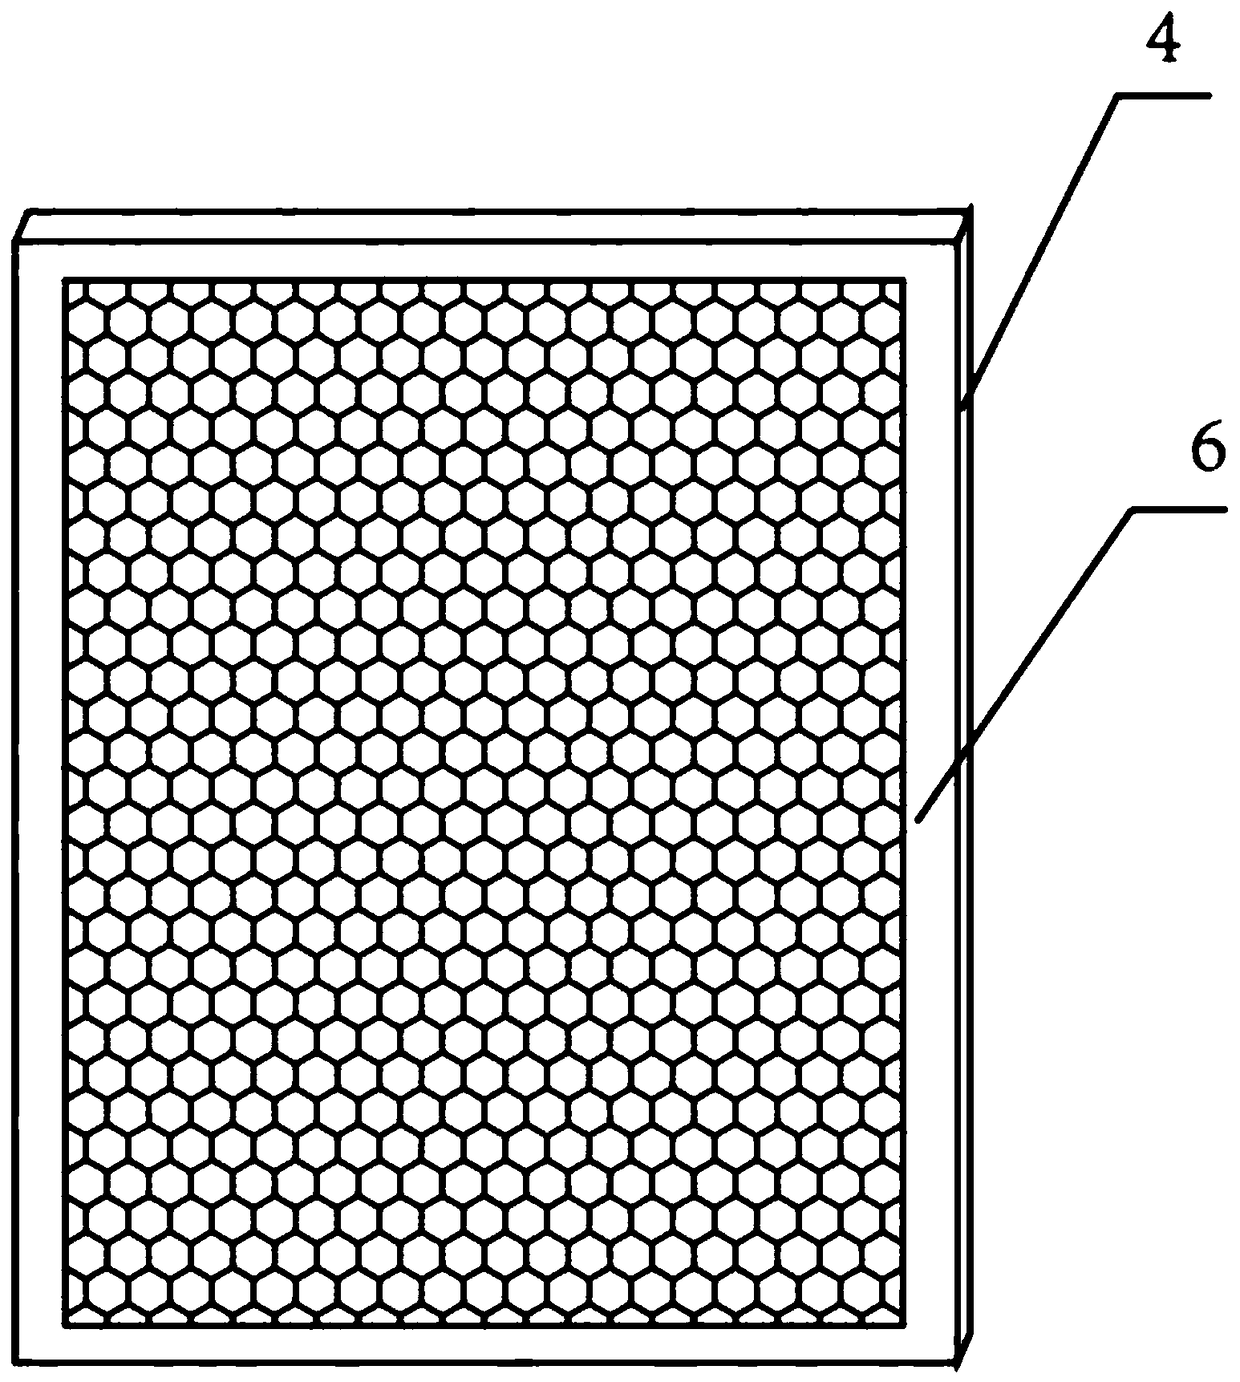 Filter net based on formaldehyde purification function